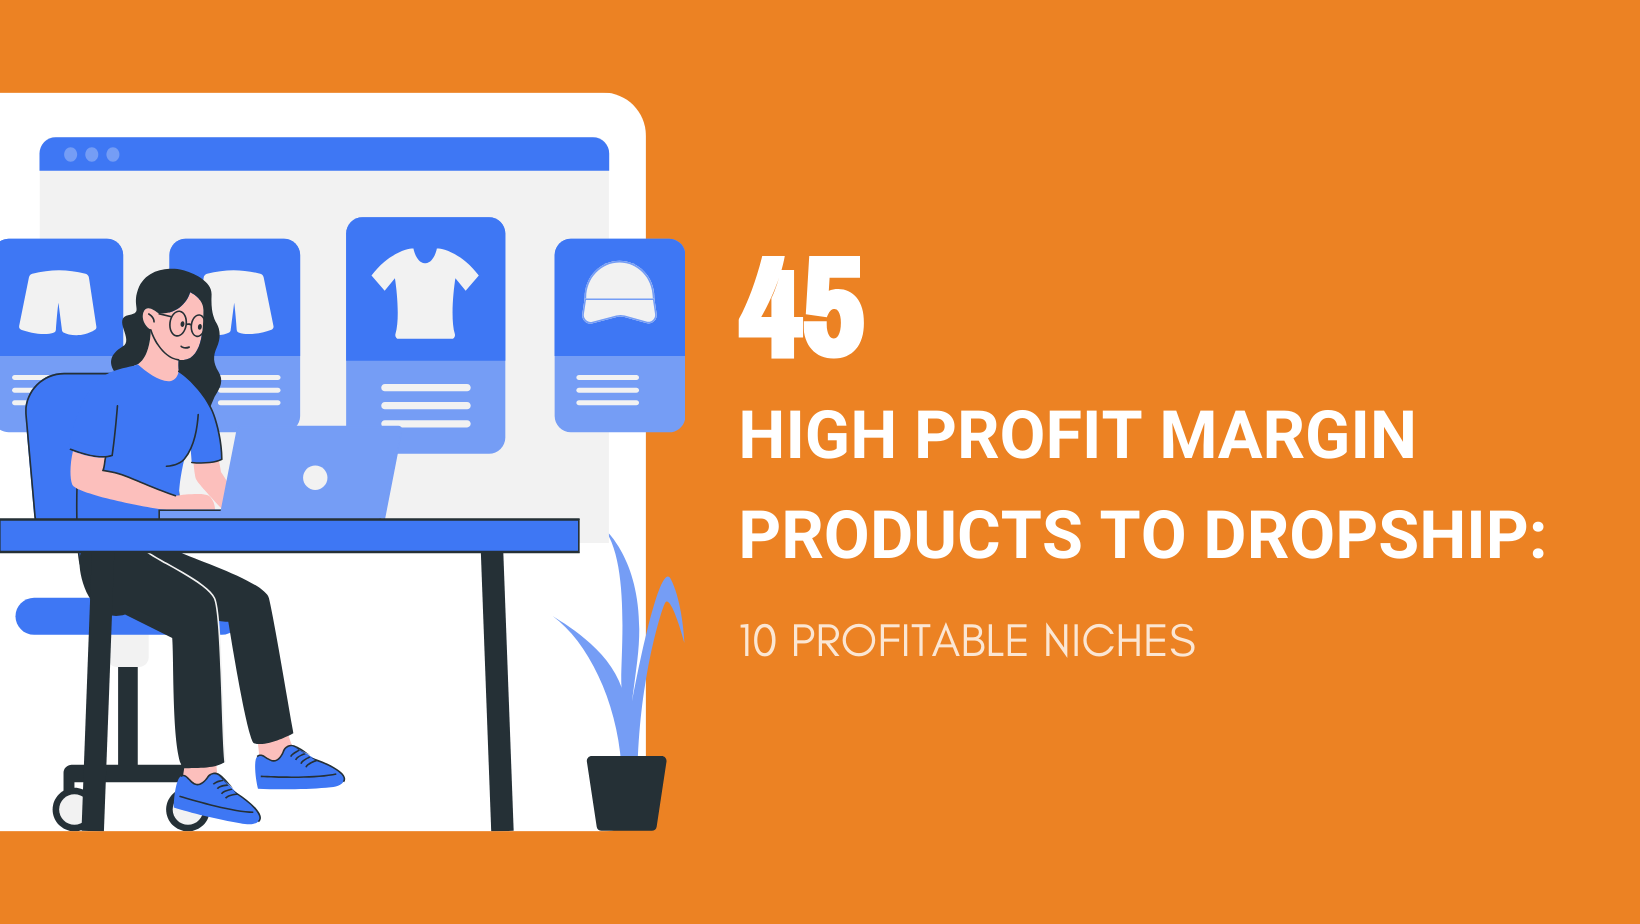 45 HIGH PROFIT MARGIN PRODUCTS TO DROPSHIP 10 PROFITABLE NICHES